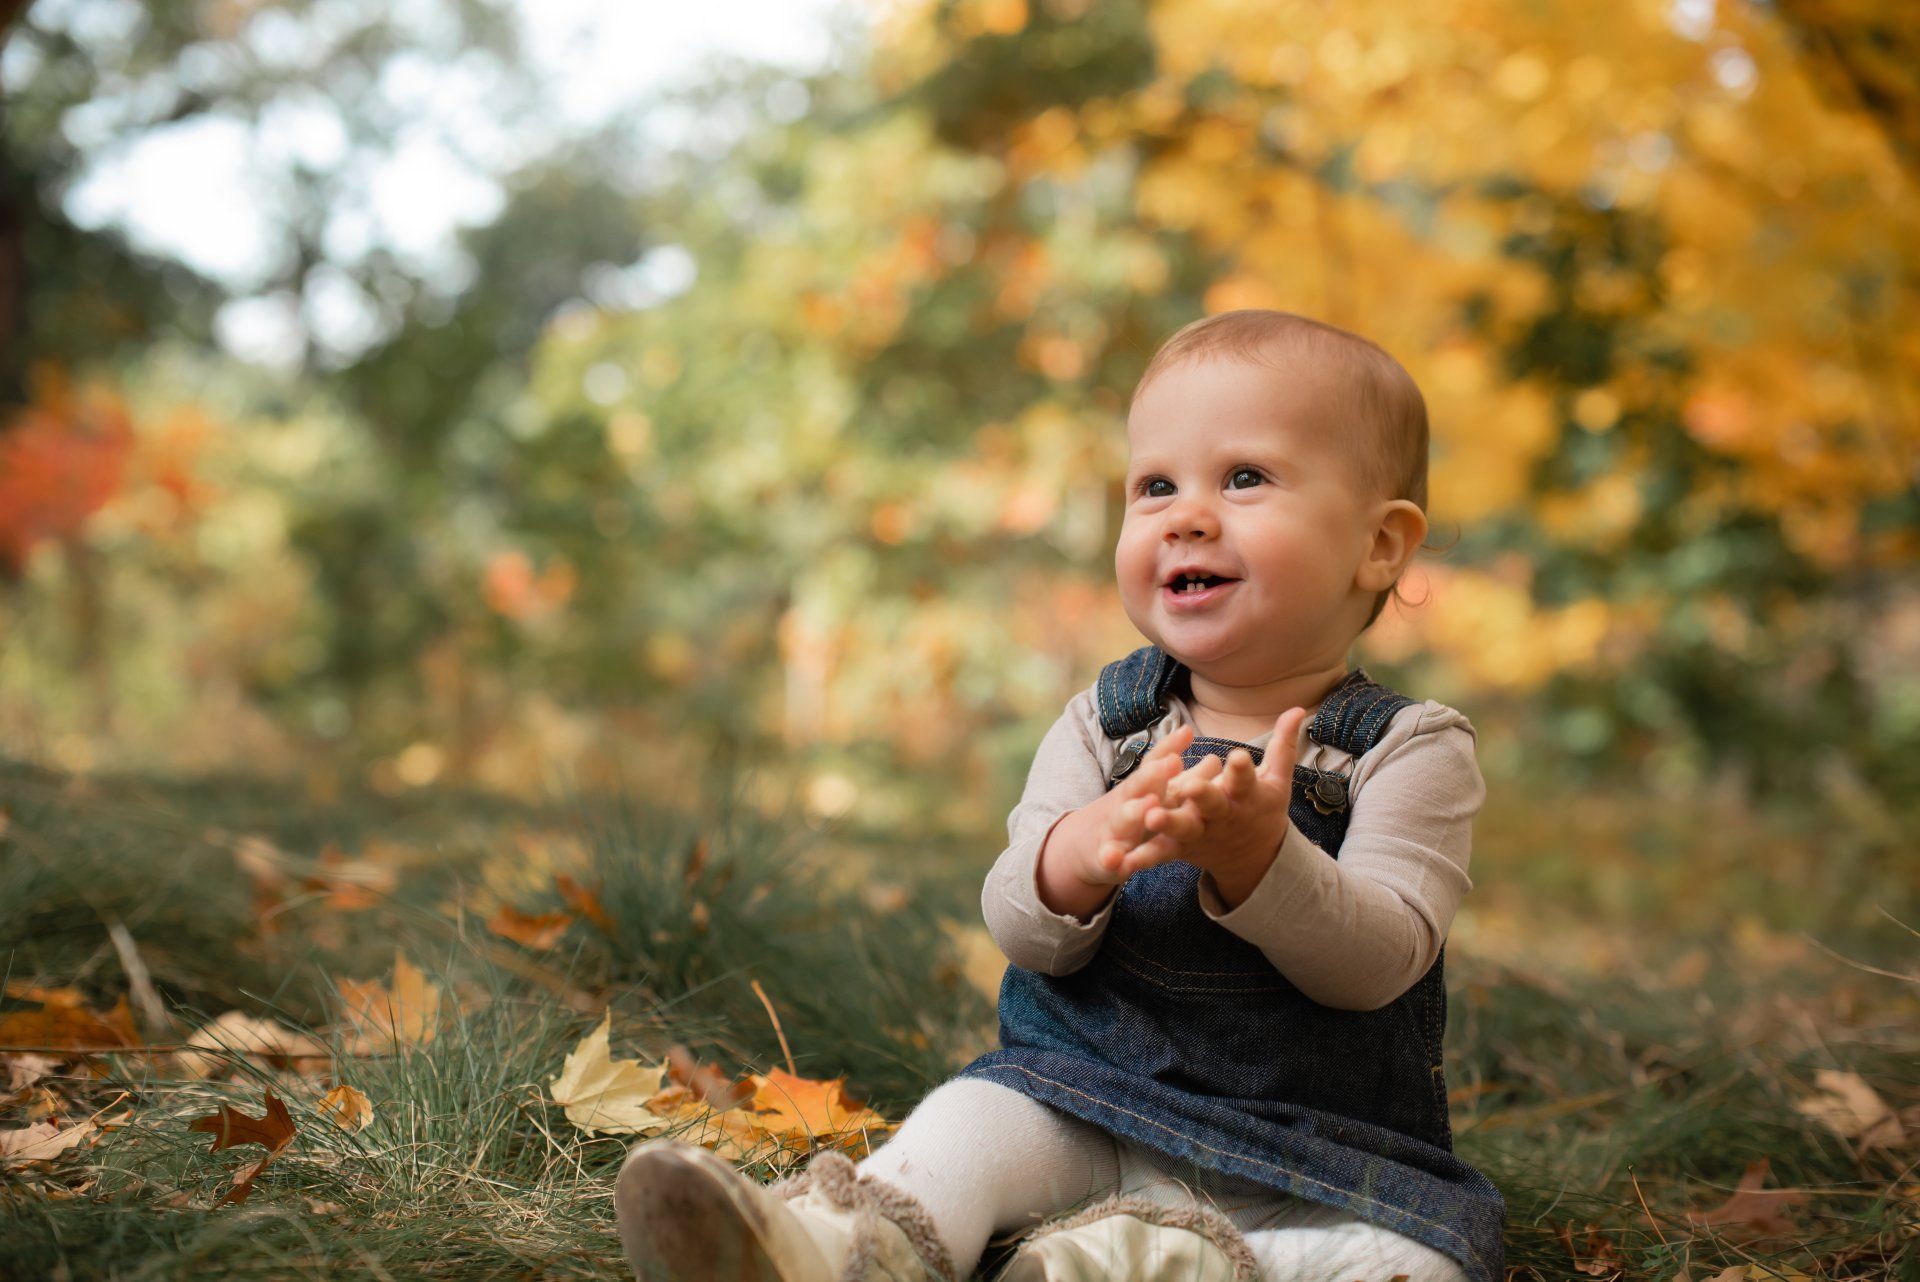 Photo of a toddler sitting on the grass in a leaf covered field